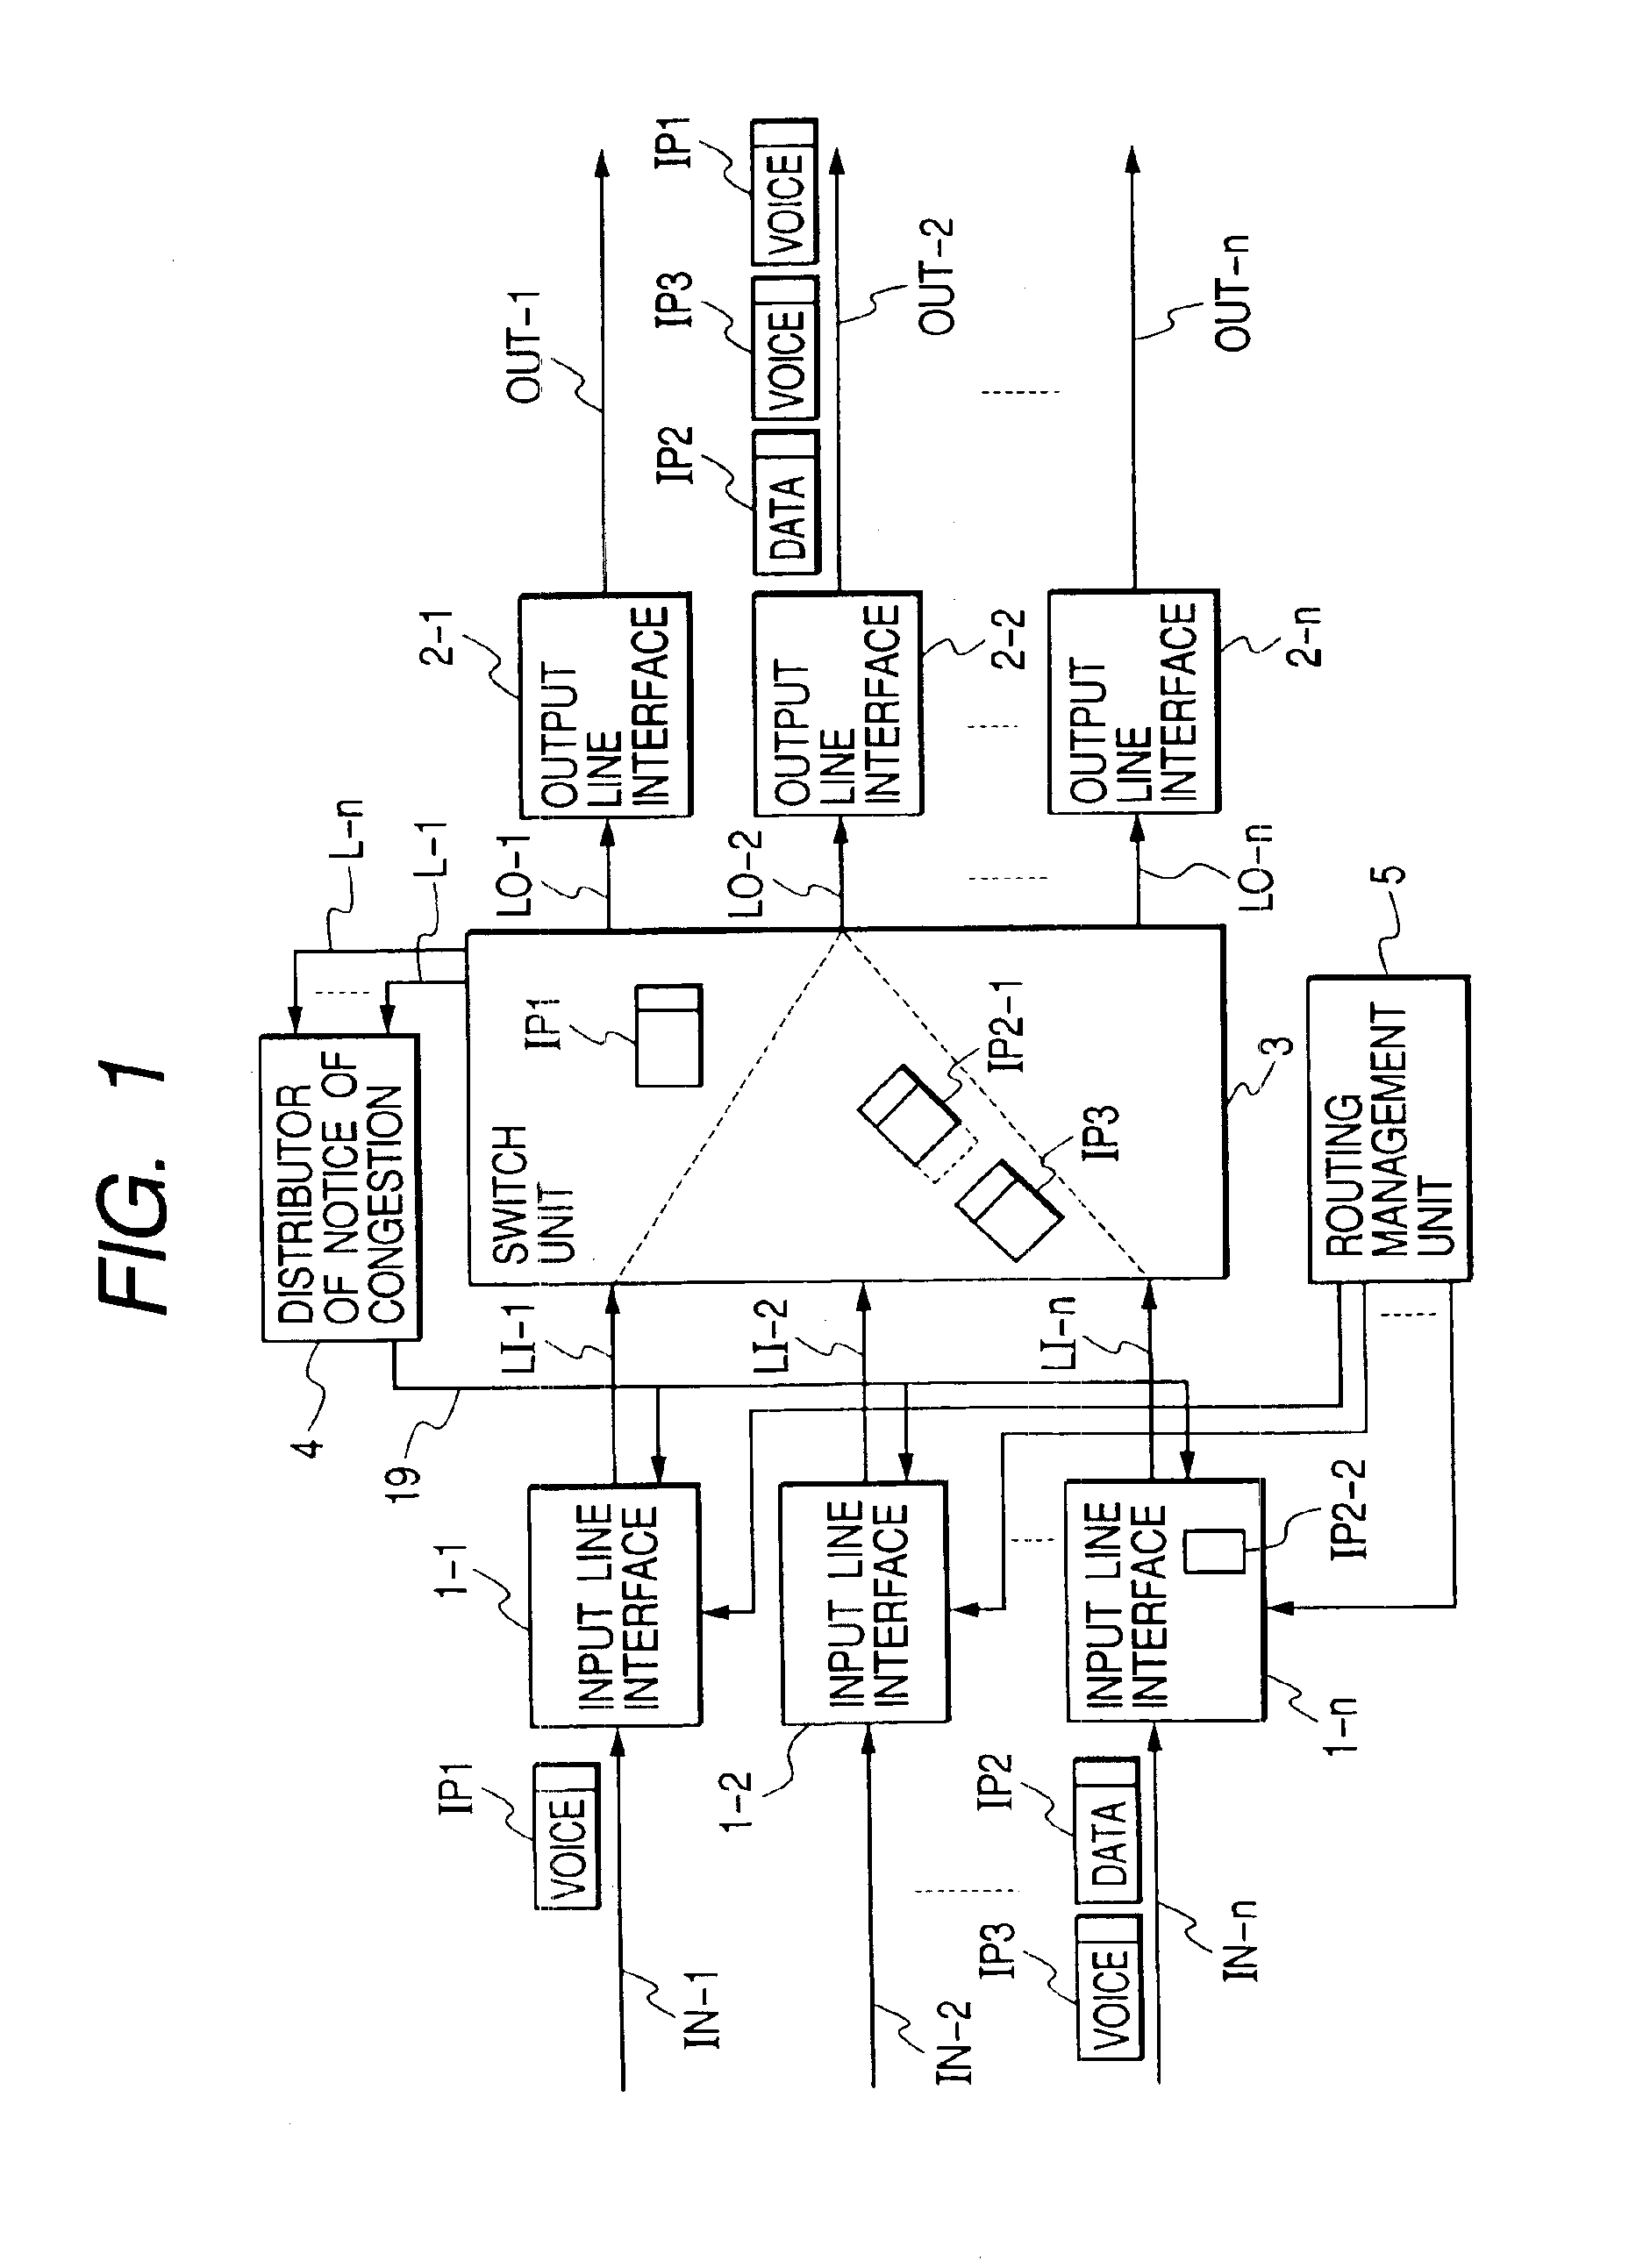 Packet switch for switching variable length packets in the form of ATM cells